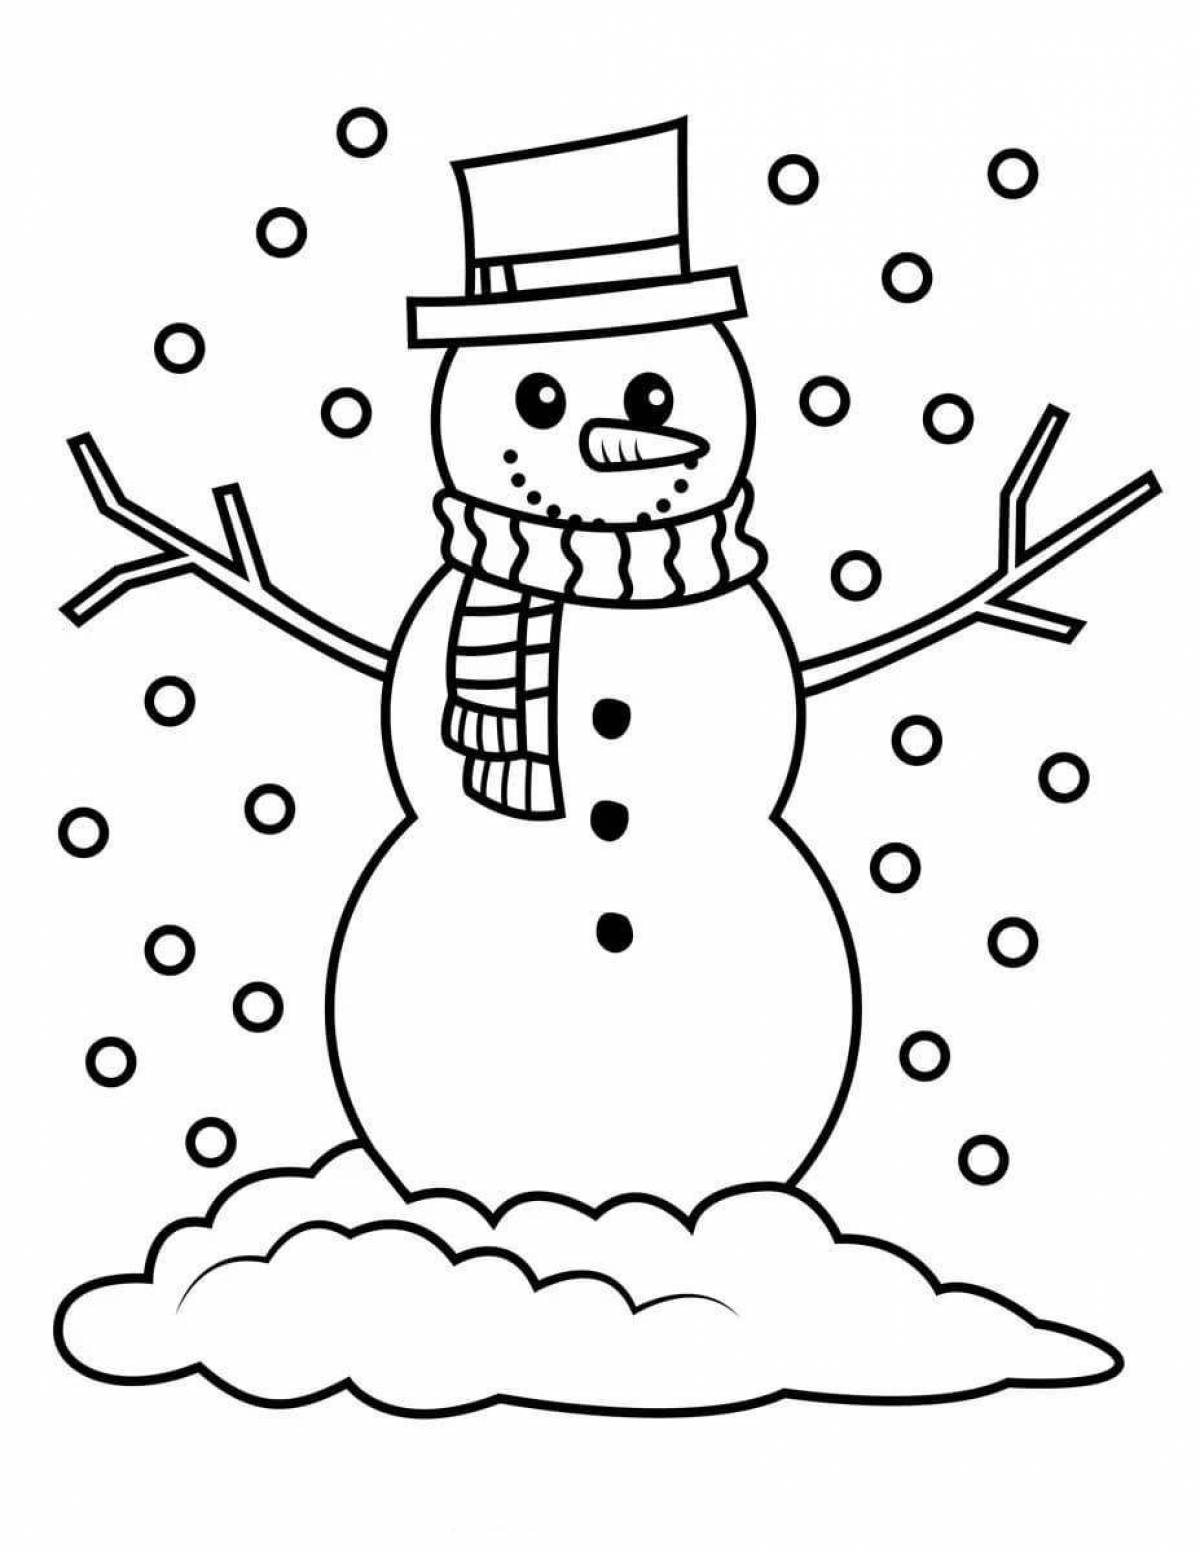 Magic snowman coloring book for kids